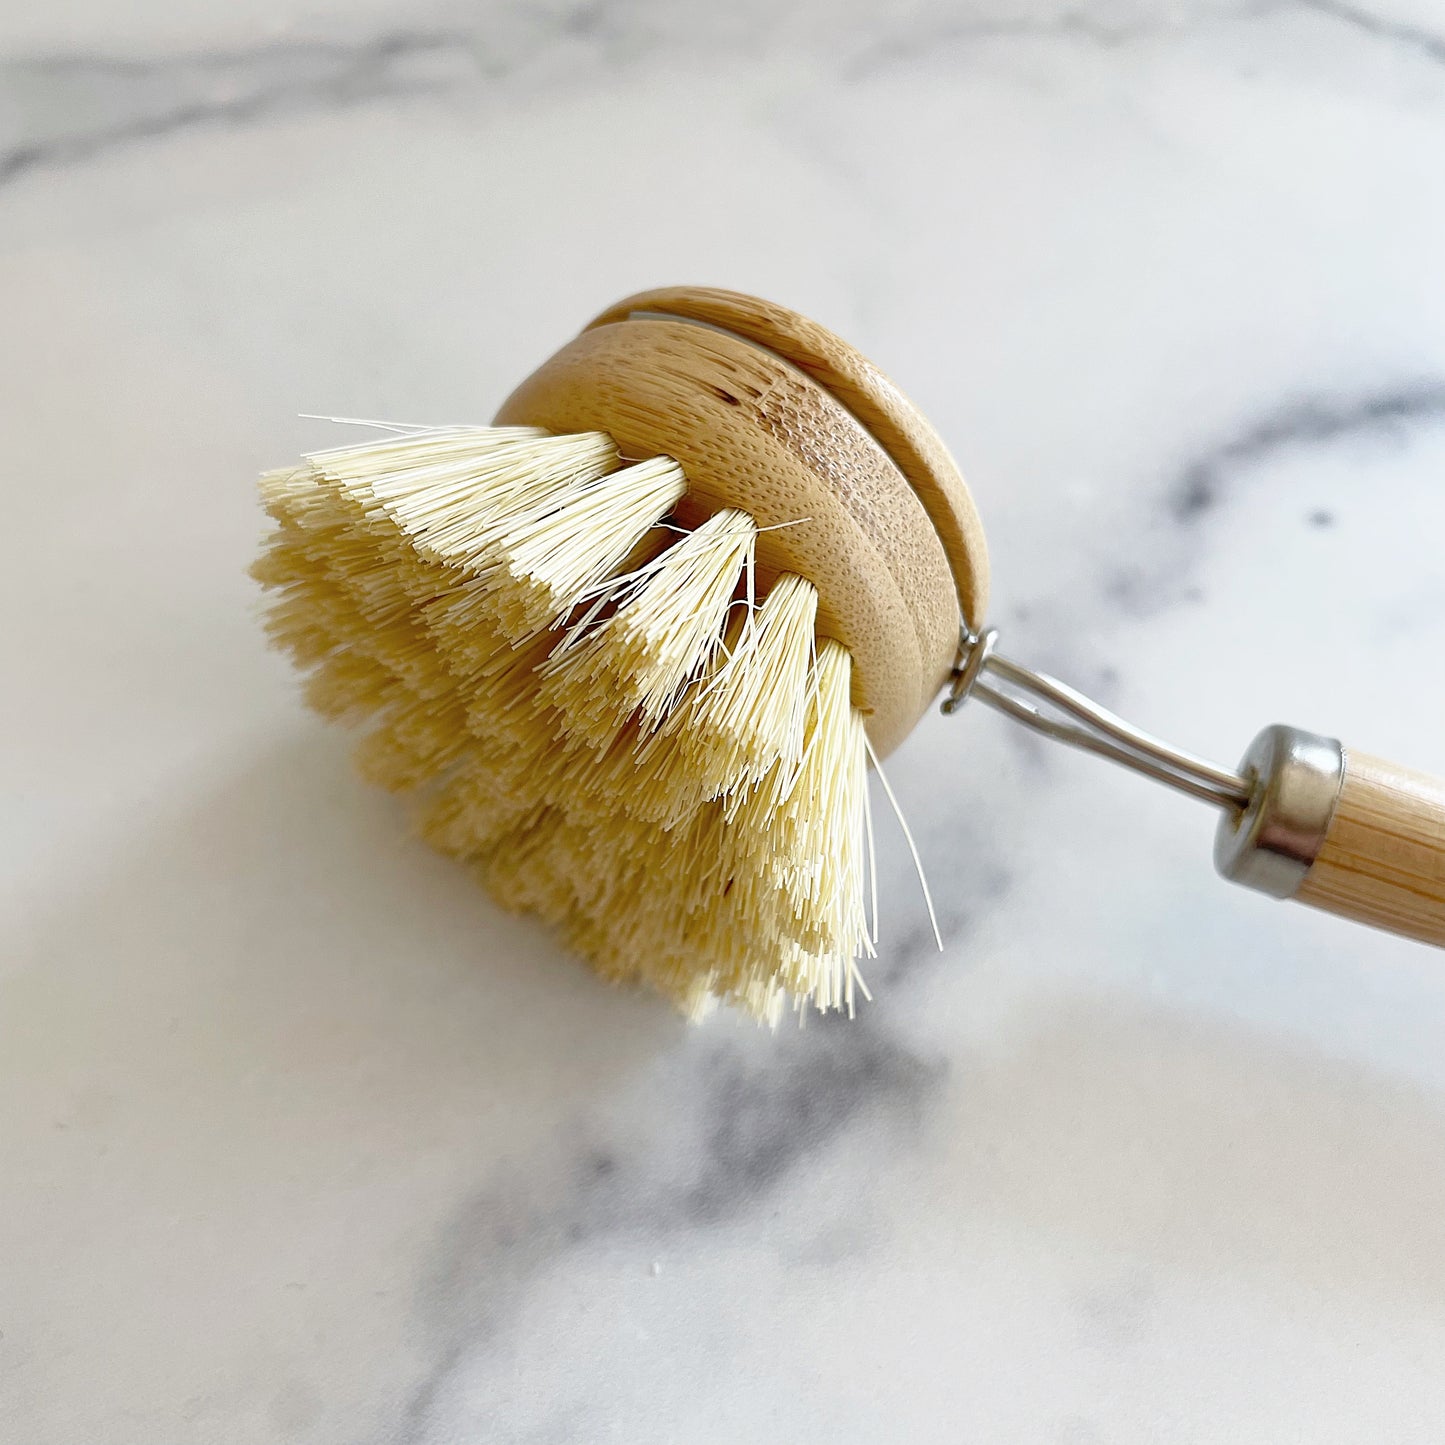 Bamboo Long Handled Dish Cleaner